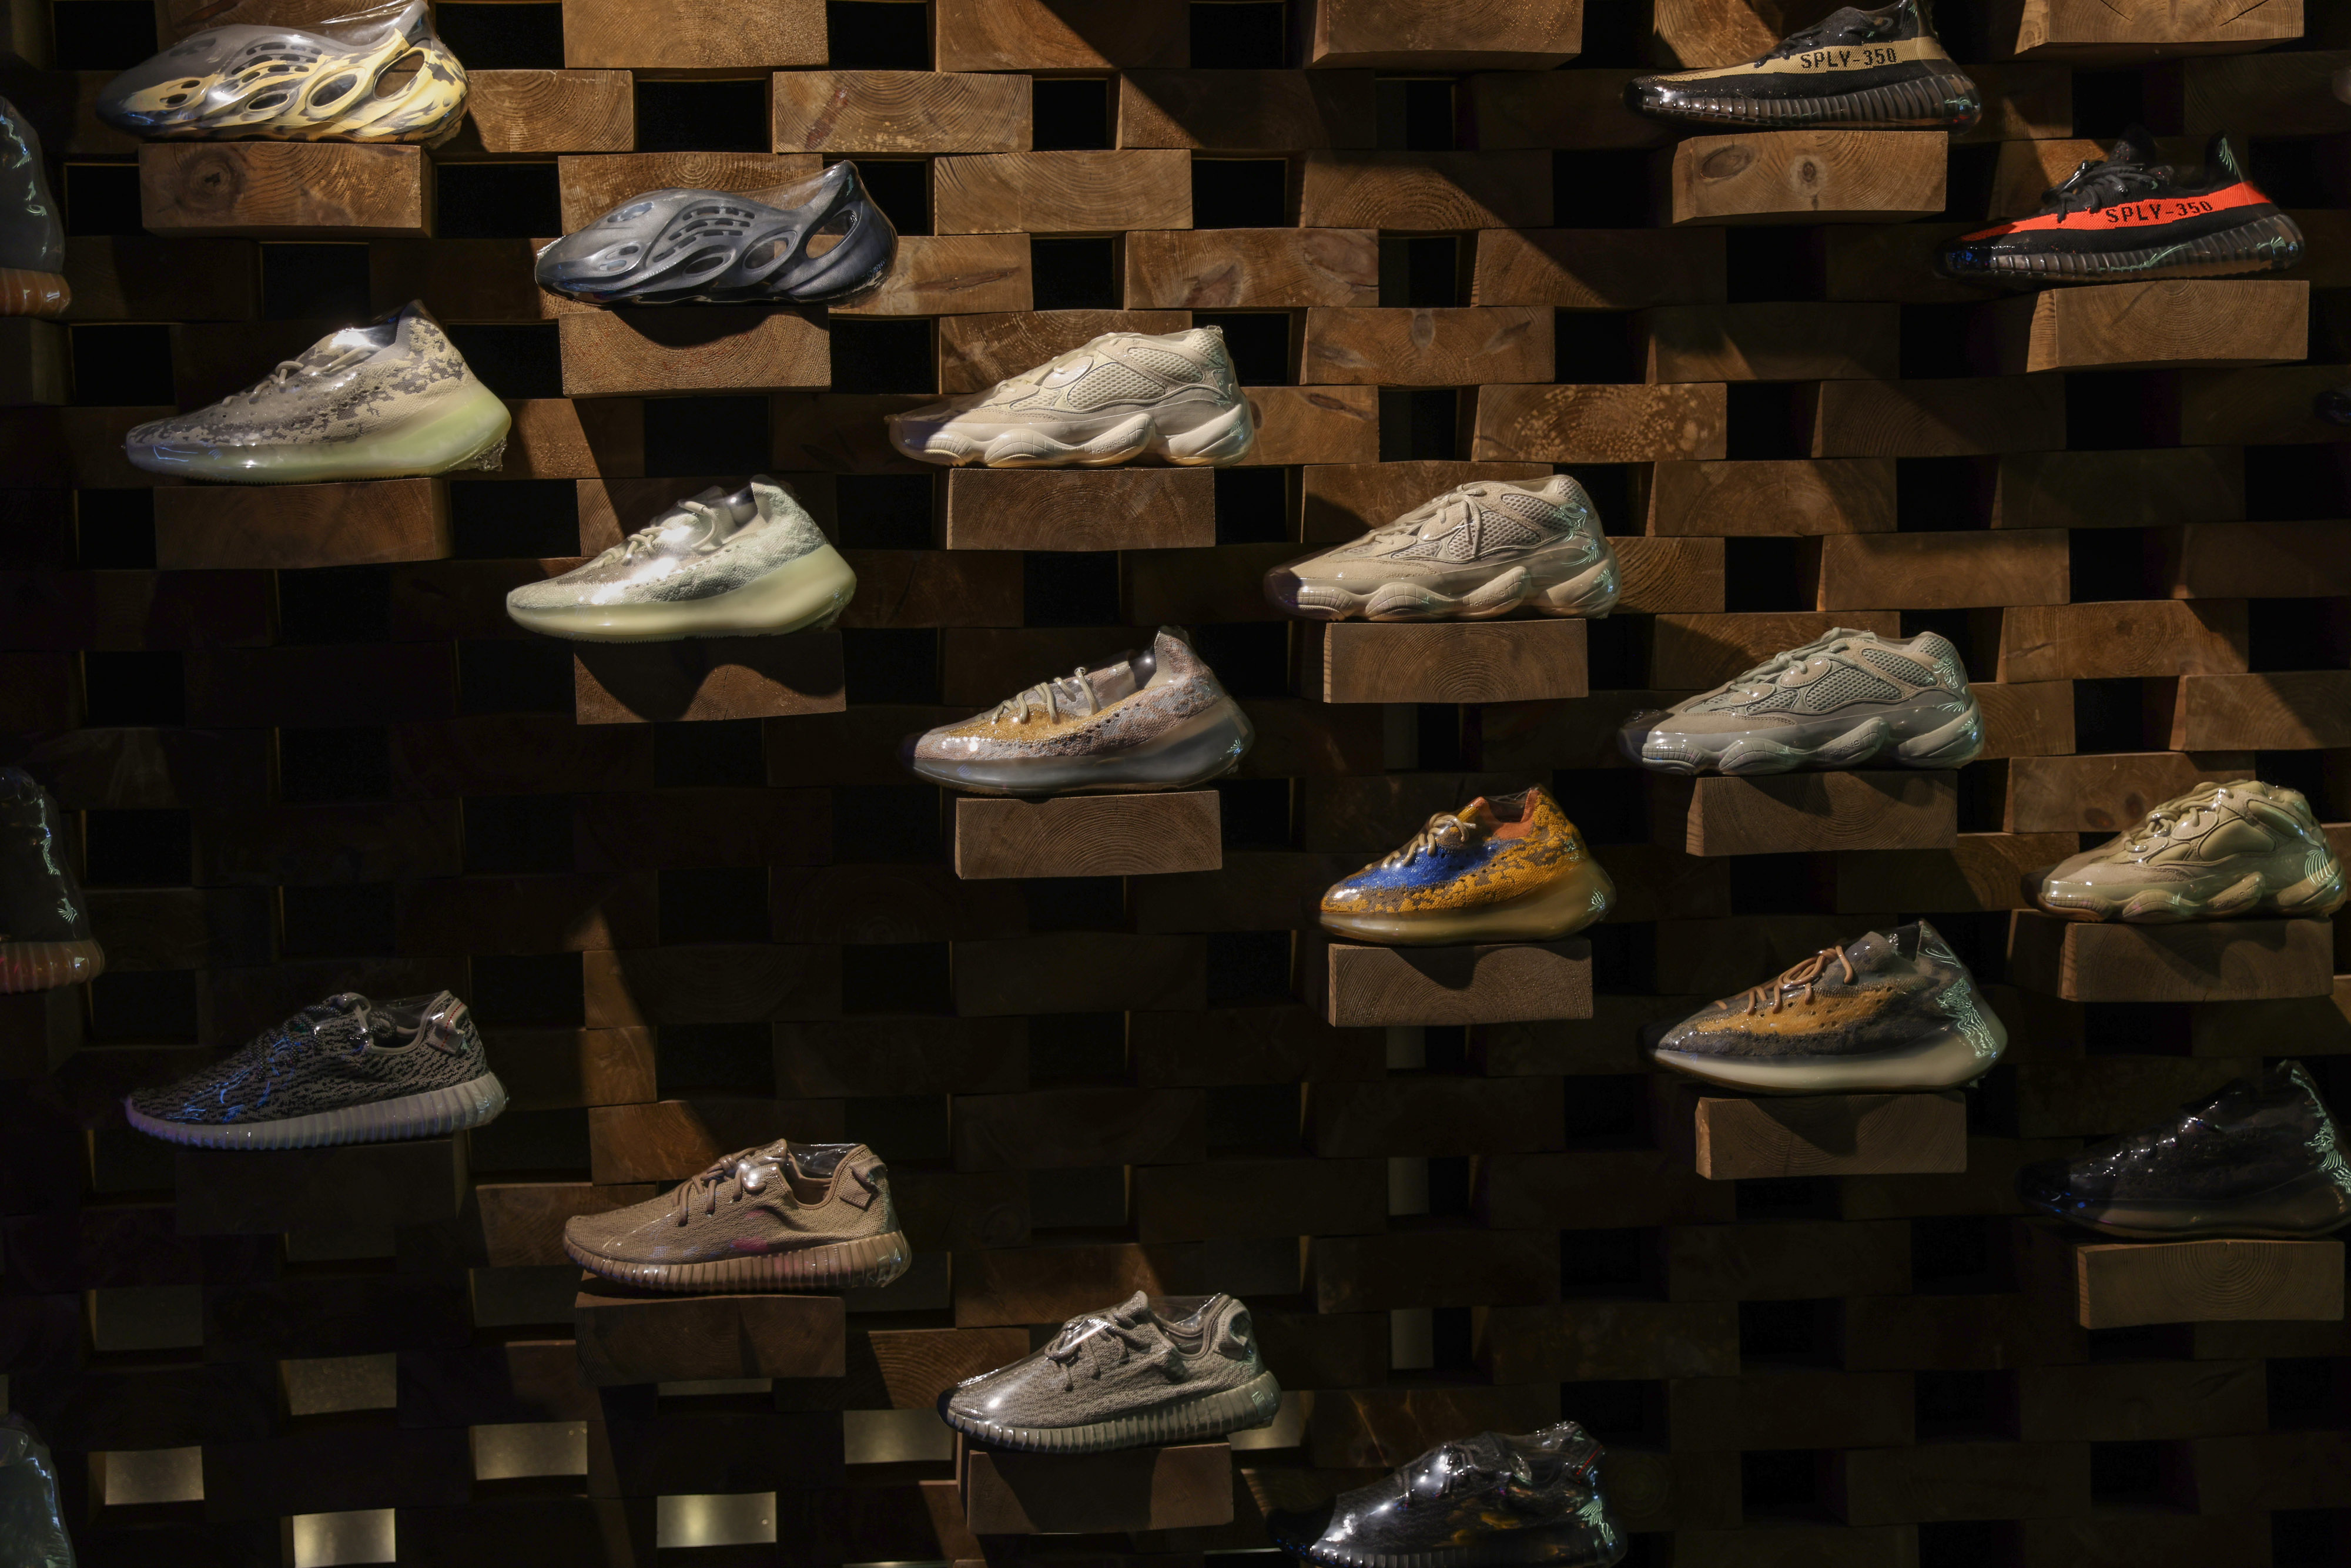 Adidas Yeezy Shoes Week With Wholesale Partners - Bloomberg